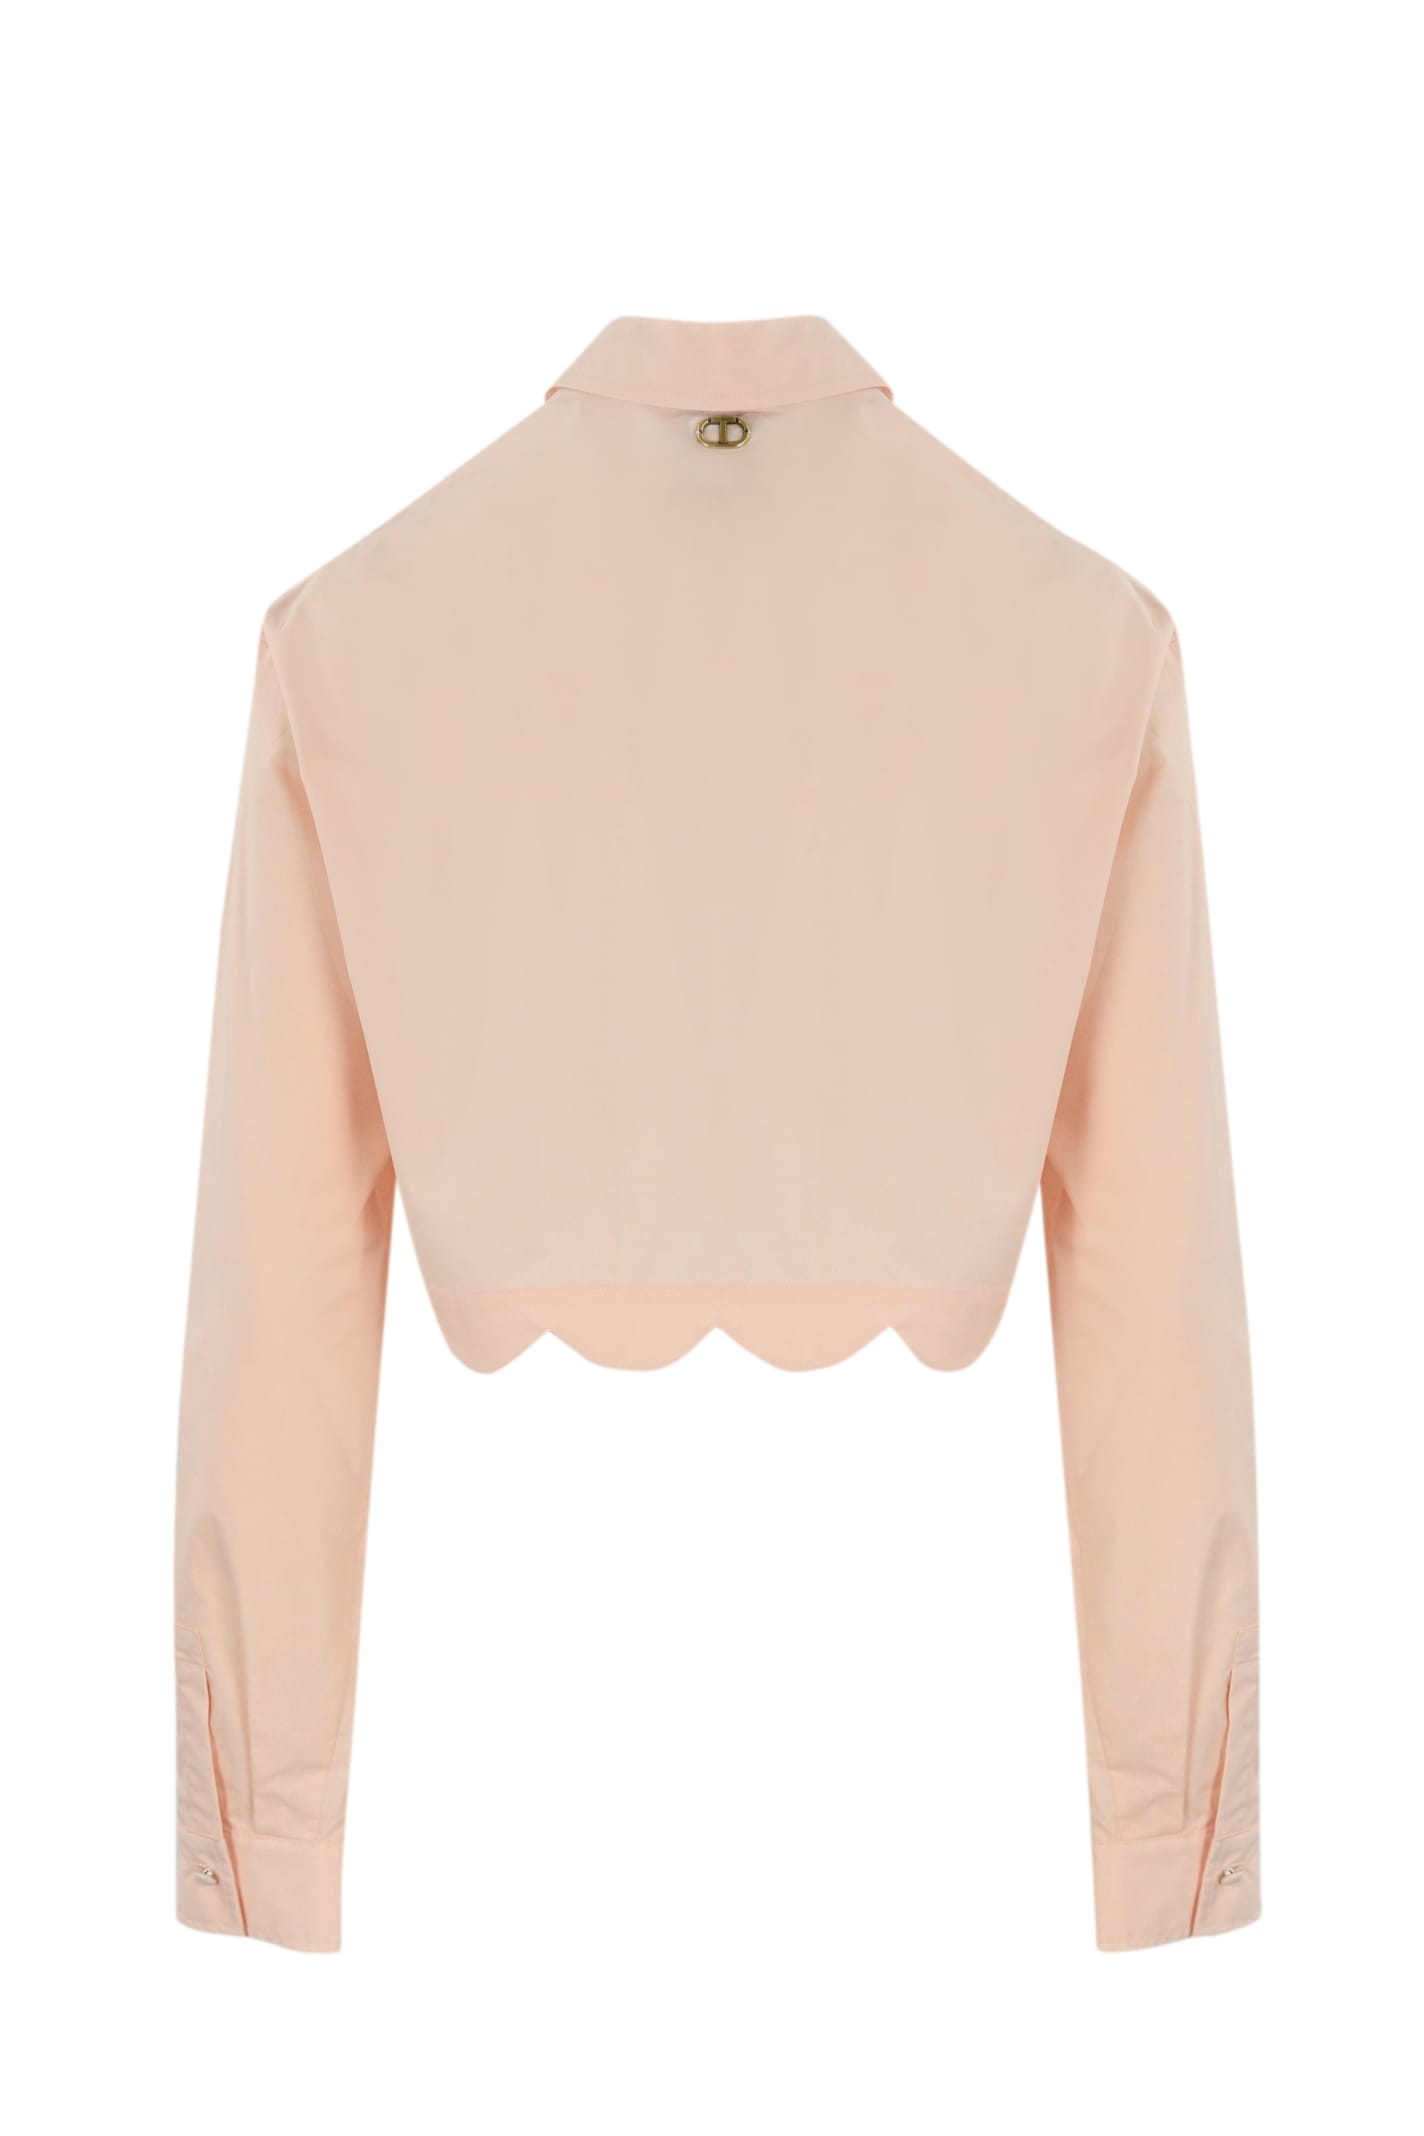 Shop Twinset Scalloped Cropped Shirt In Cupcake Pink